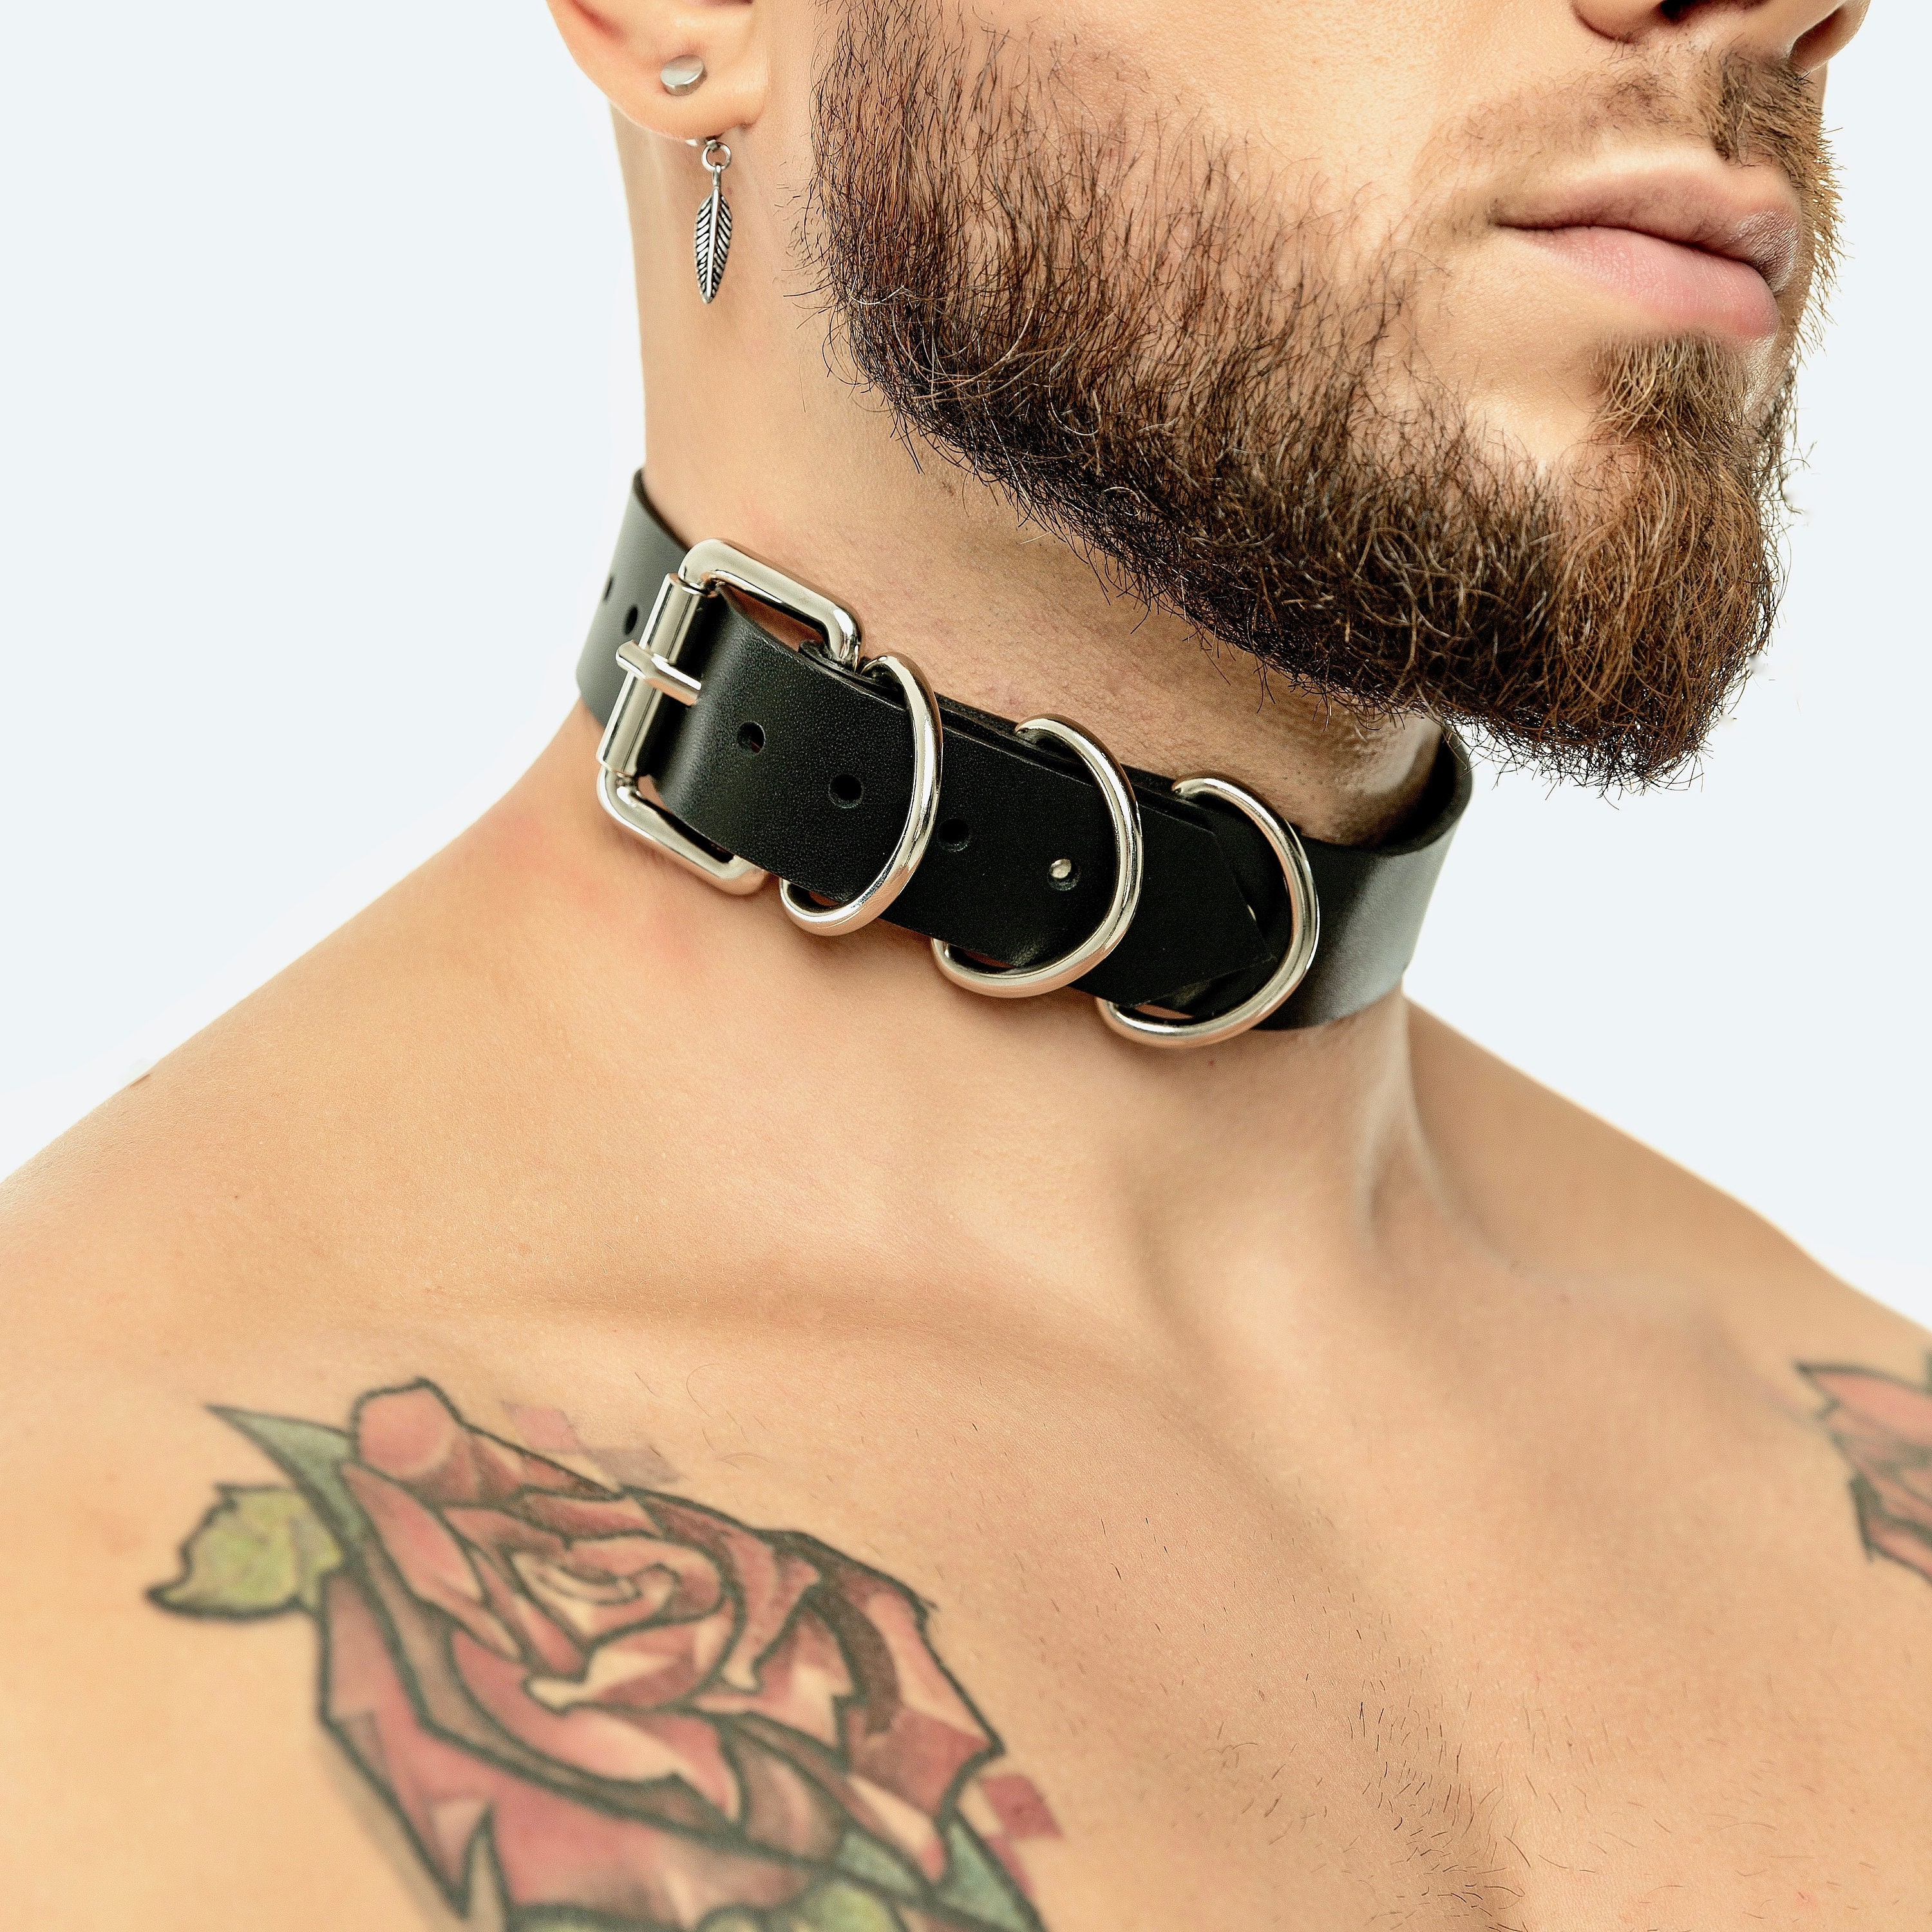 Bdsm Collar For Men Leather Submissive Collar With D Rings Etsy